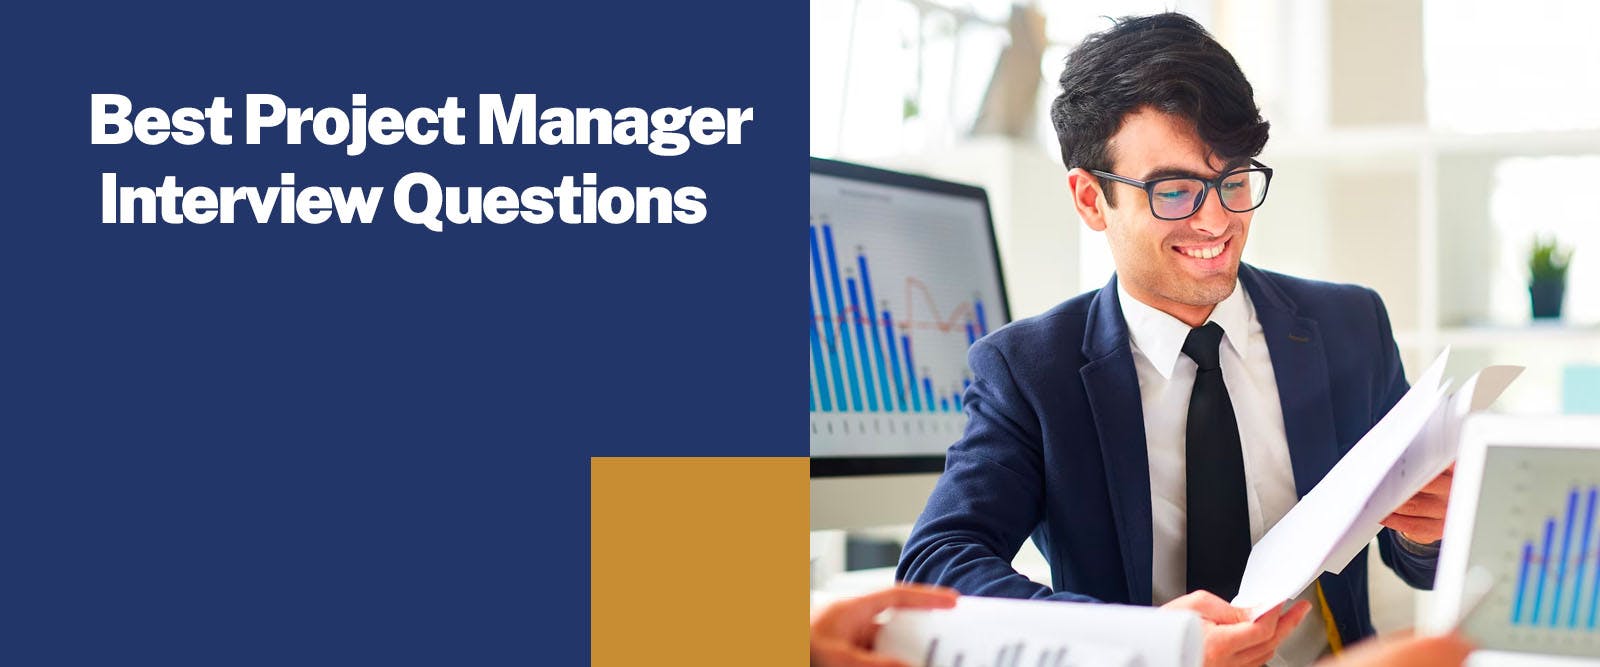 Best Project Manager Interview Questions